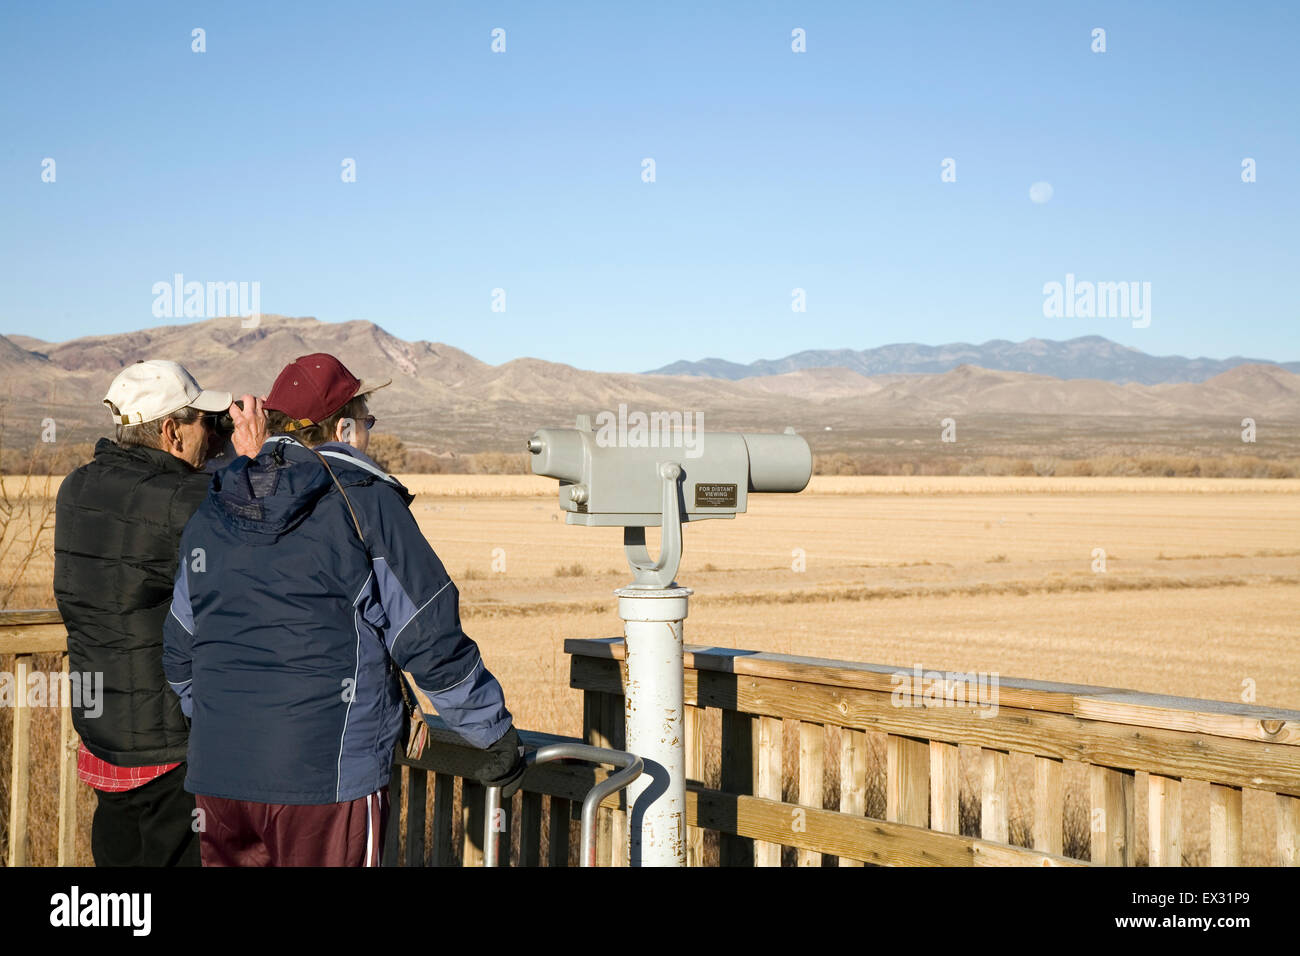 Several of the observation decks at Bosque del Apache National Wildlife Refuge are fitted with spotting scopes. Stock Photo